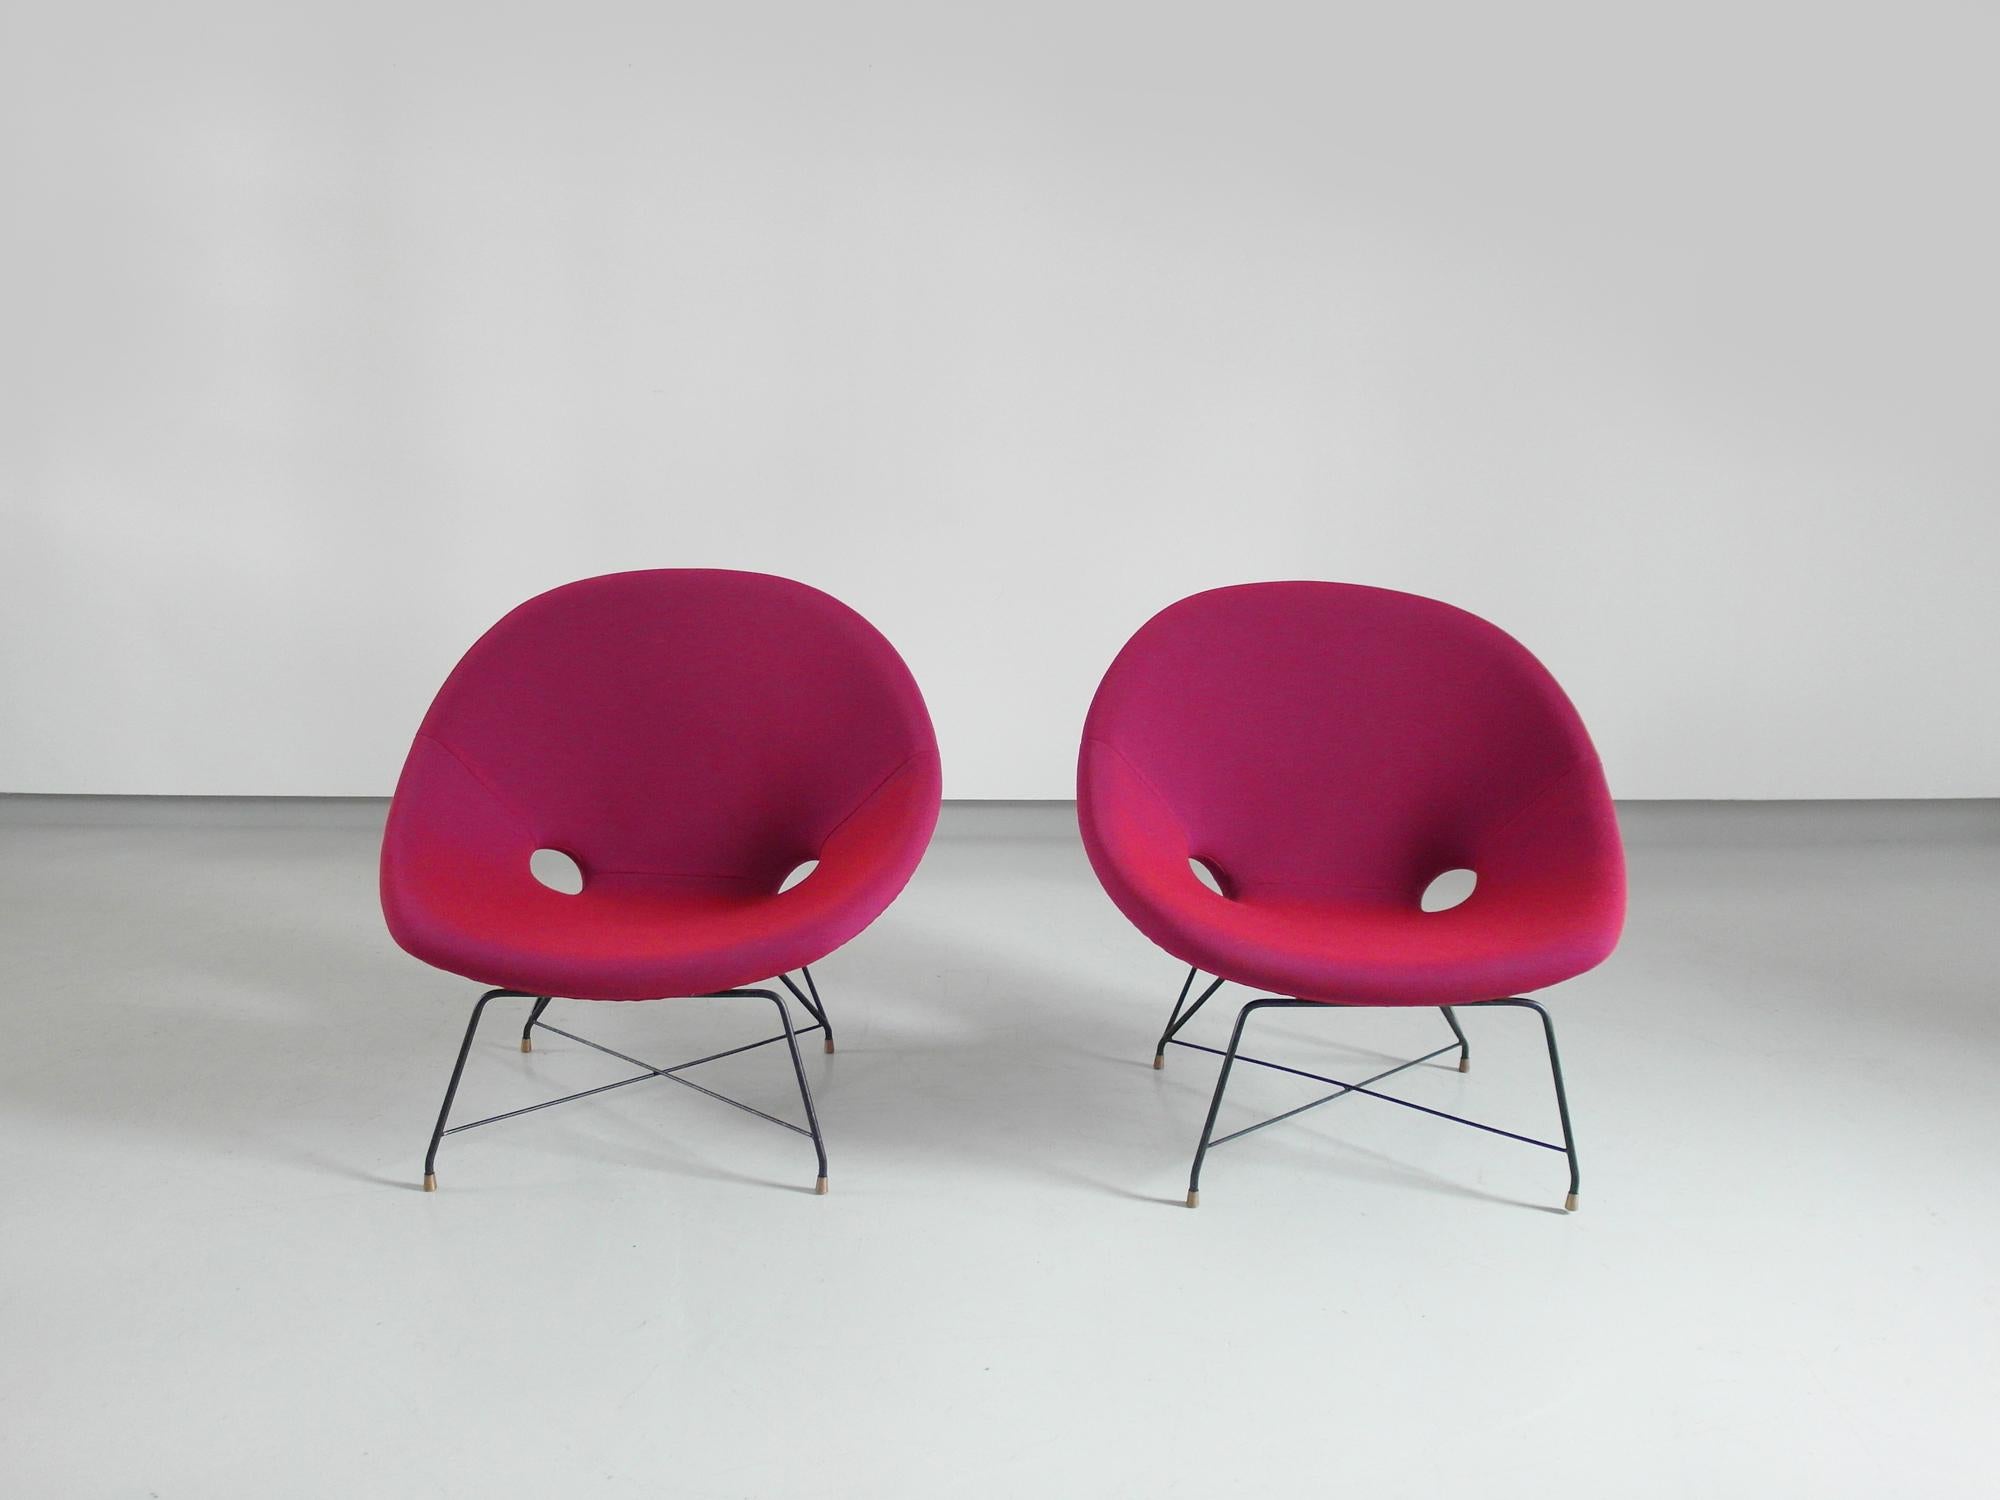 Pair of Cosmos Chairs in Ruby red/ Raspberry red by Augusto Bozzi for Saporiti For Sale 6